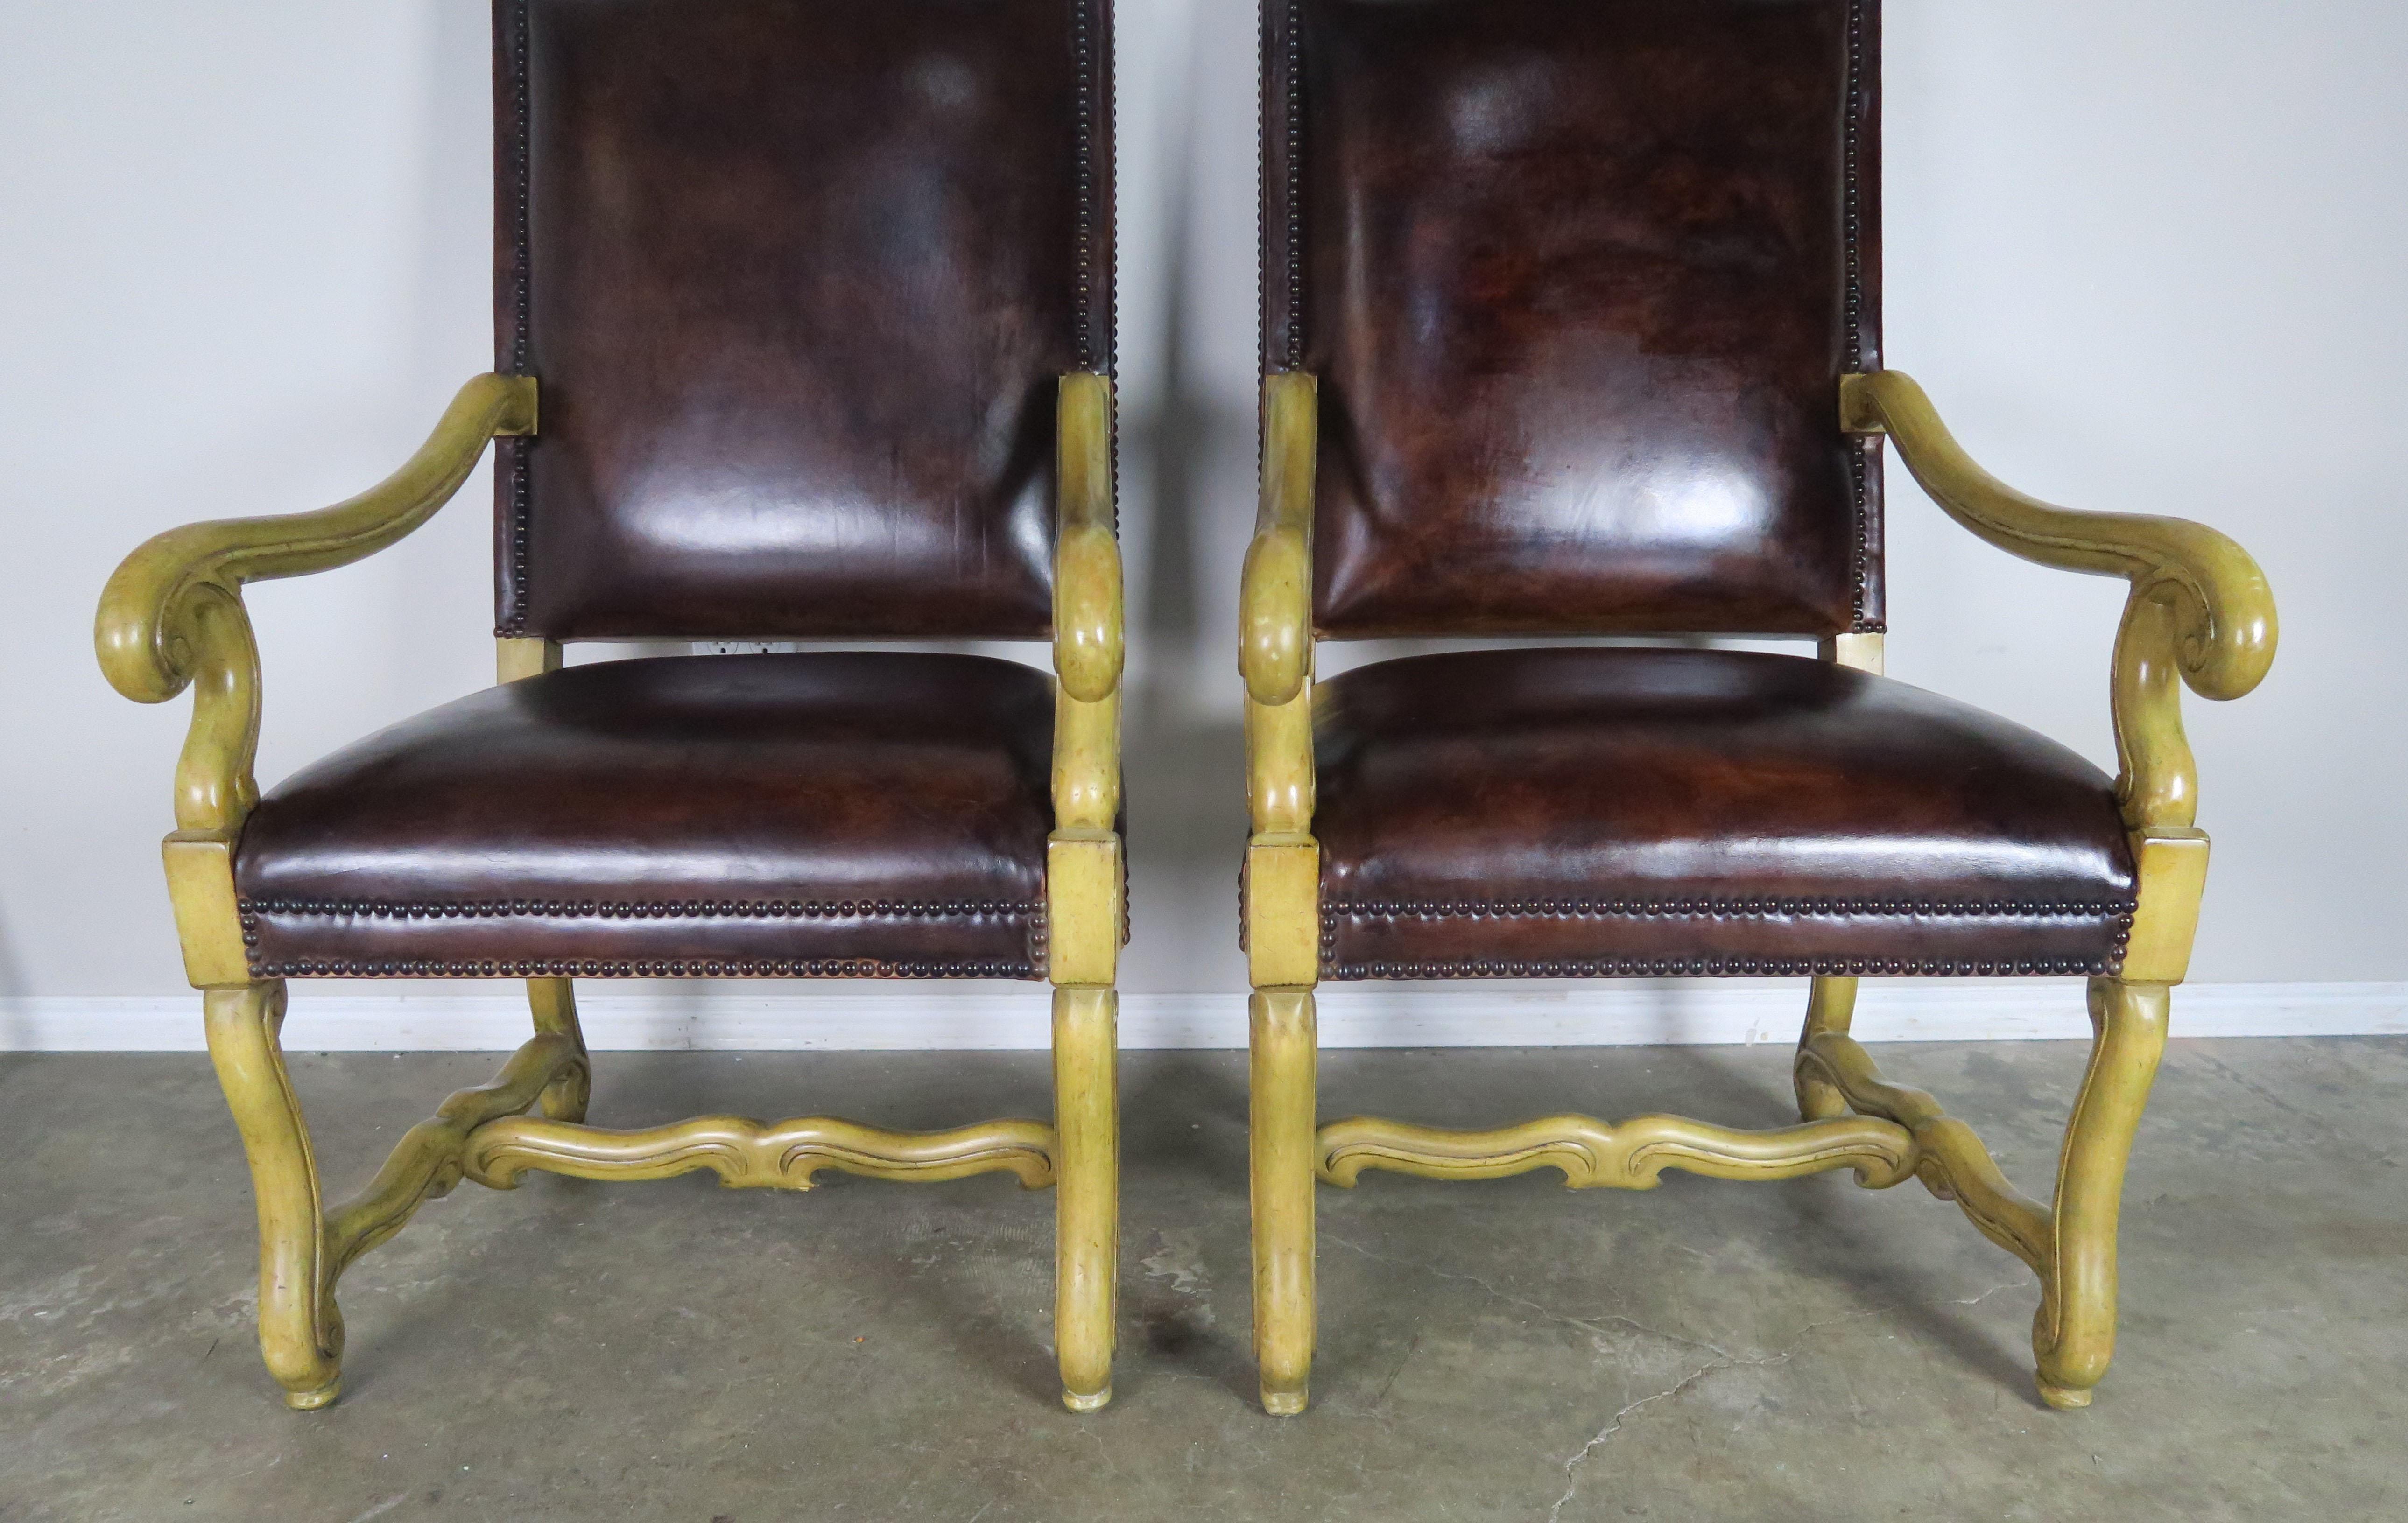 Pair of Italian walnut Tuscan style armchairs upholstered in rich tobacco colored leather and detailed with a double row of nailhead trim. Seat height 20